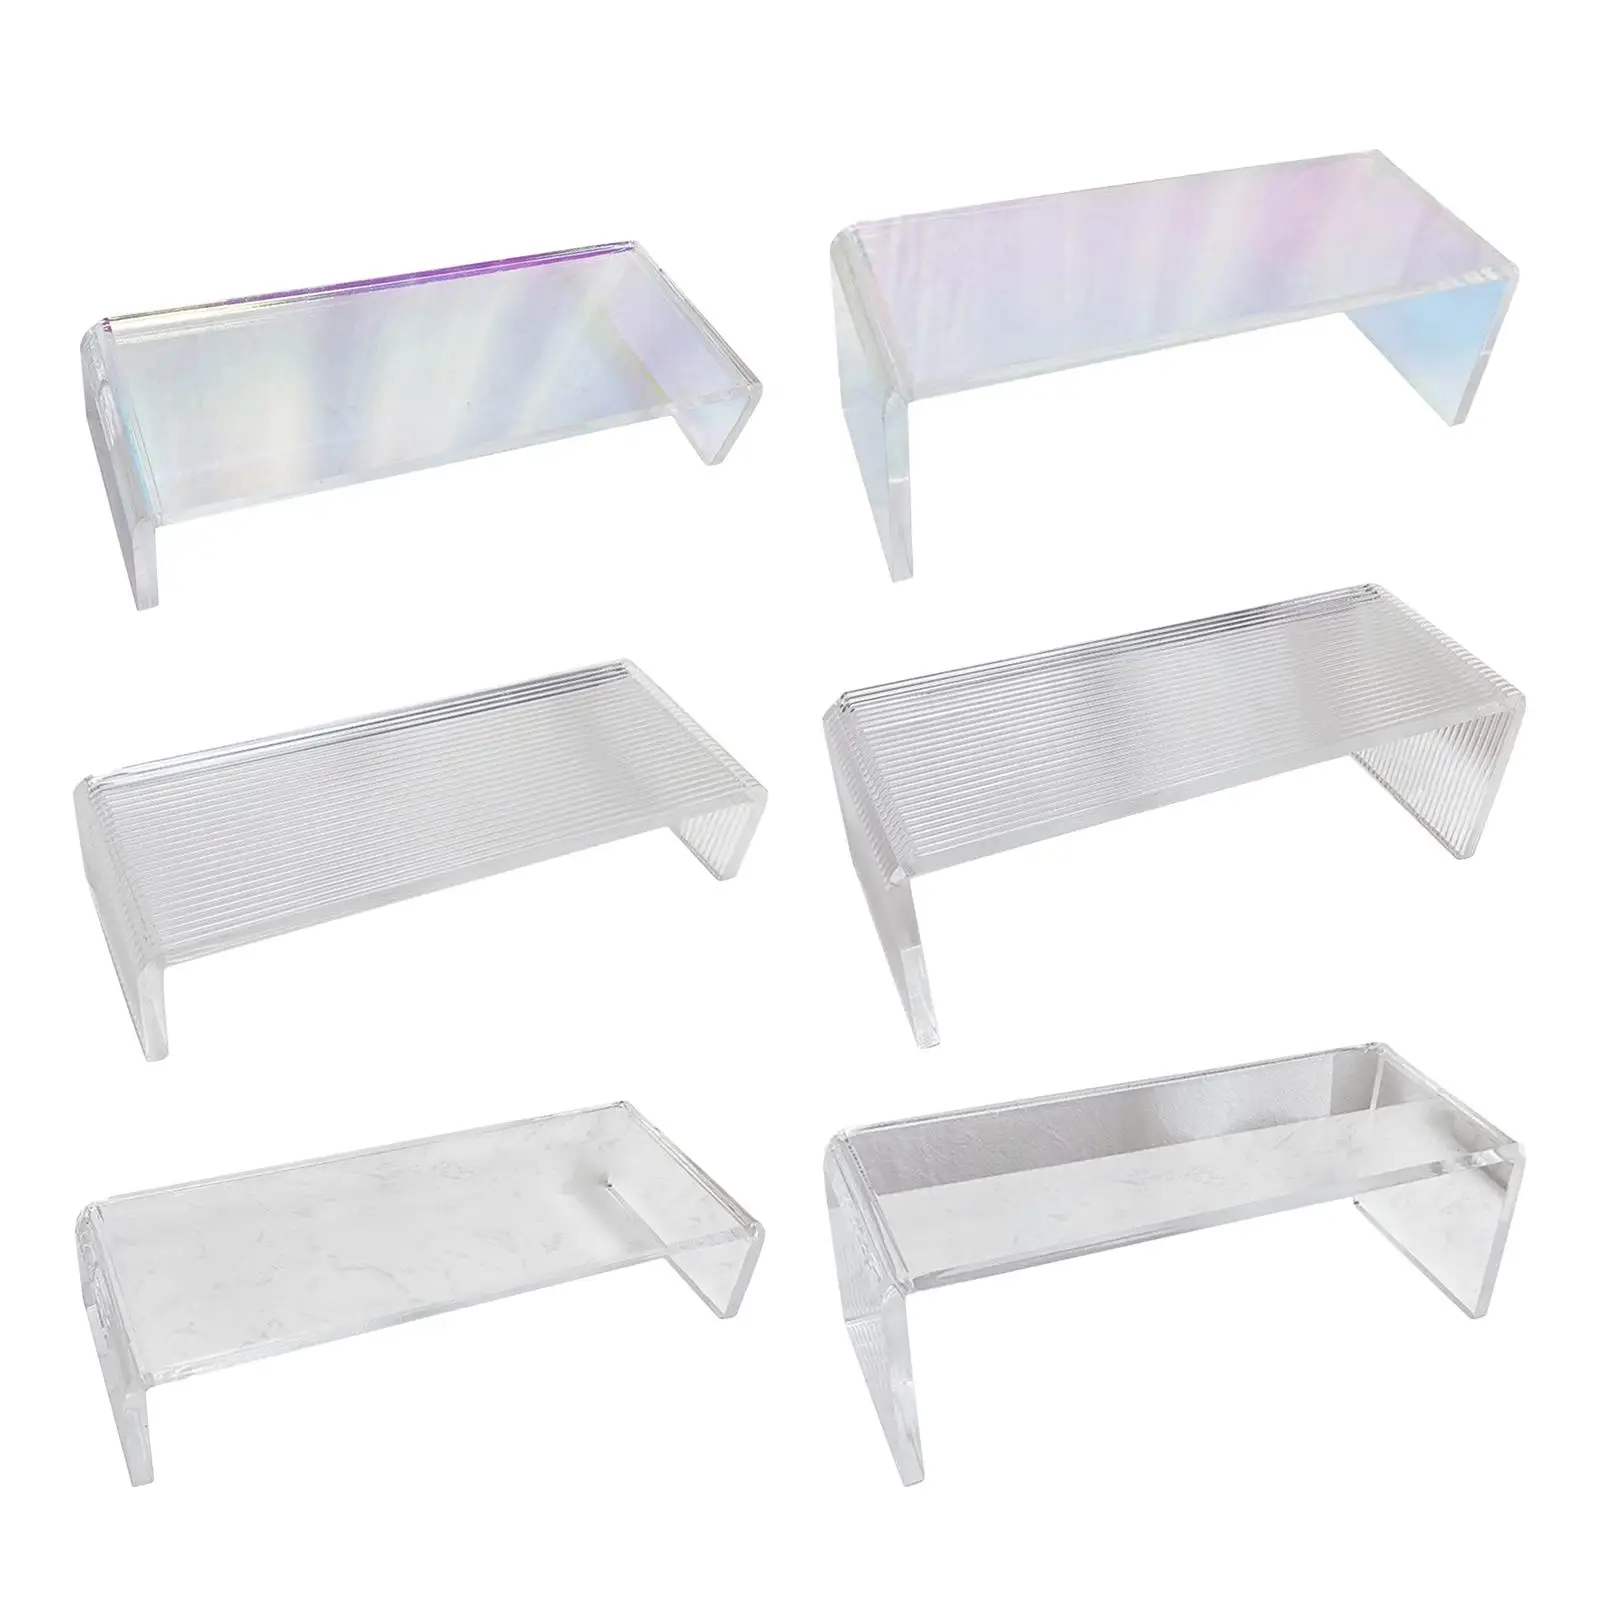 Hand Rest Cushion Washable Acrylic Nail Art Pillow Stand for Table Beginner